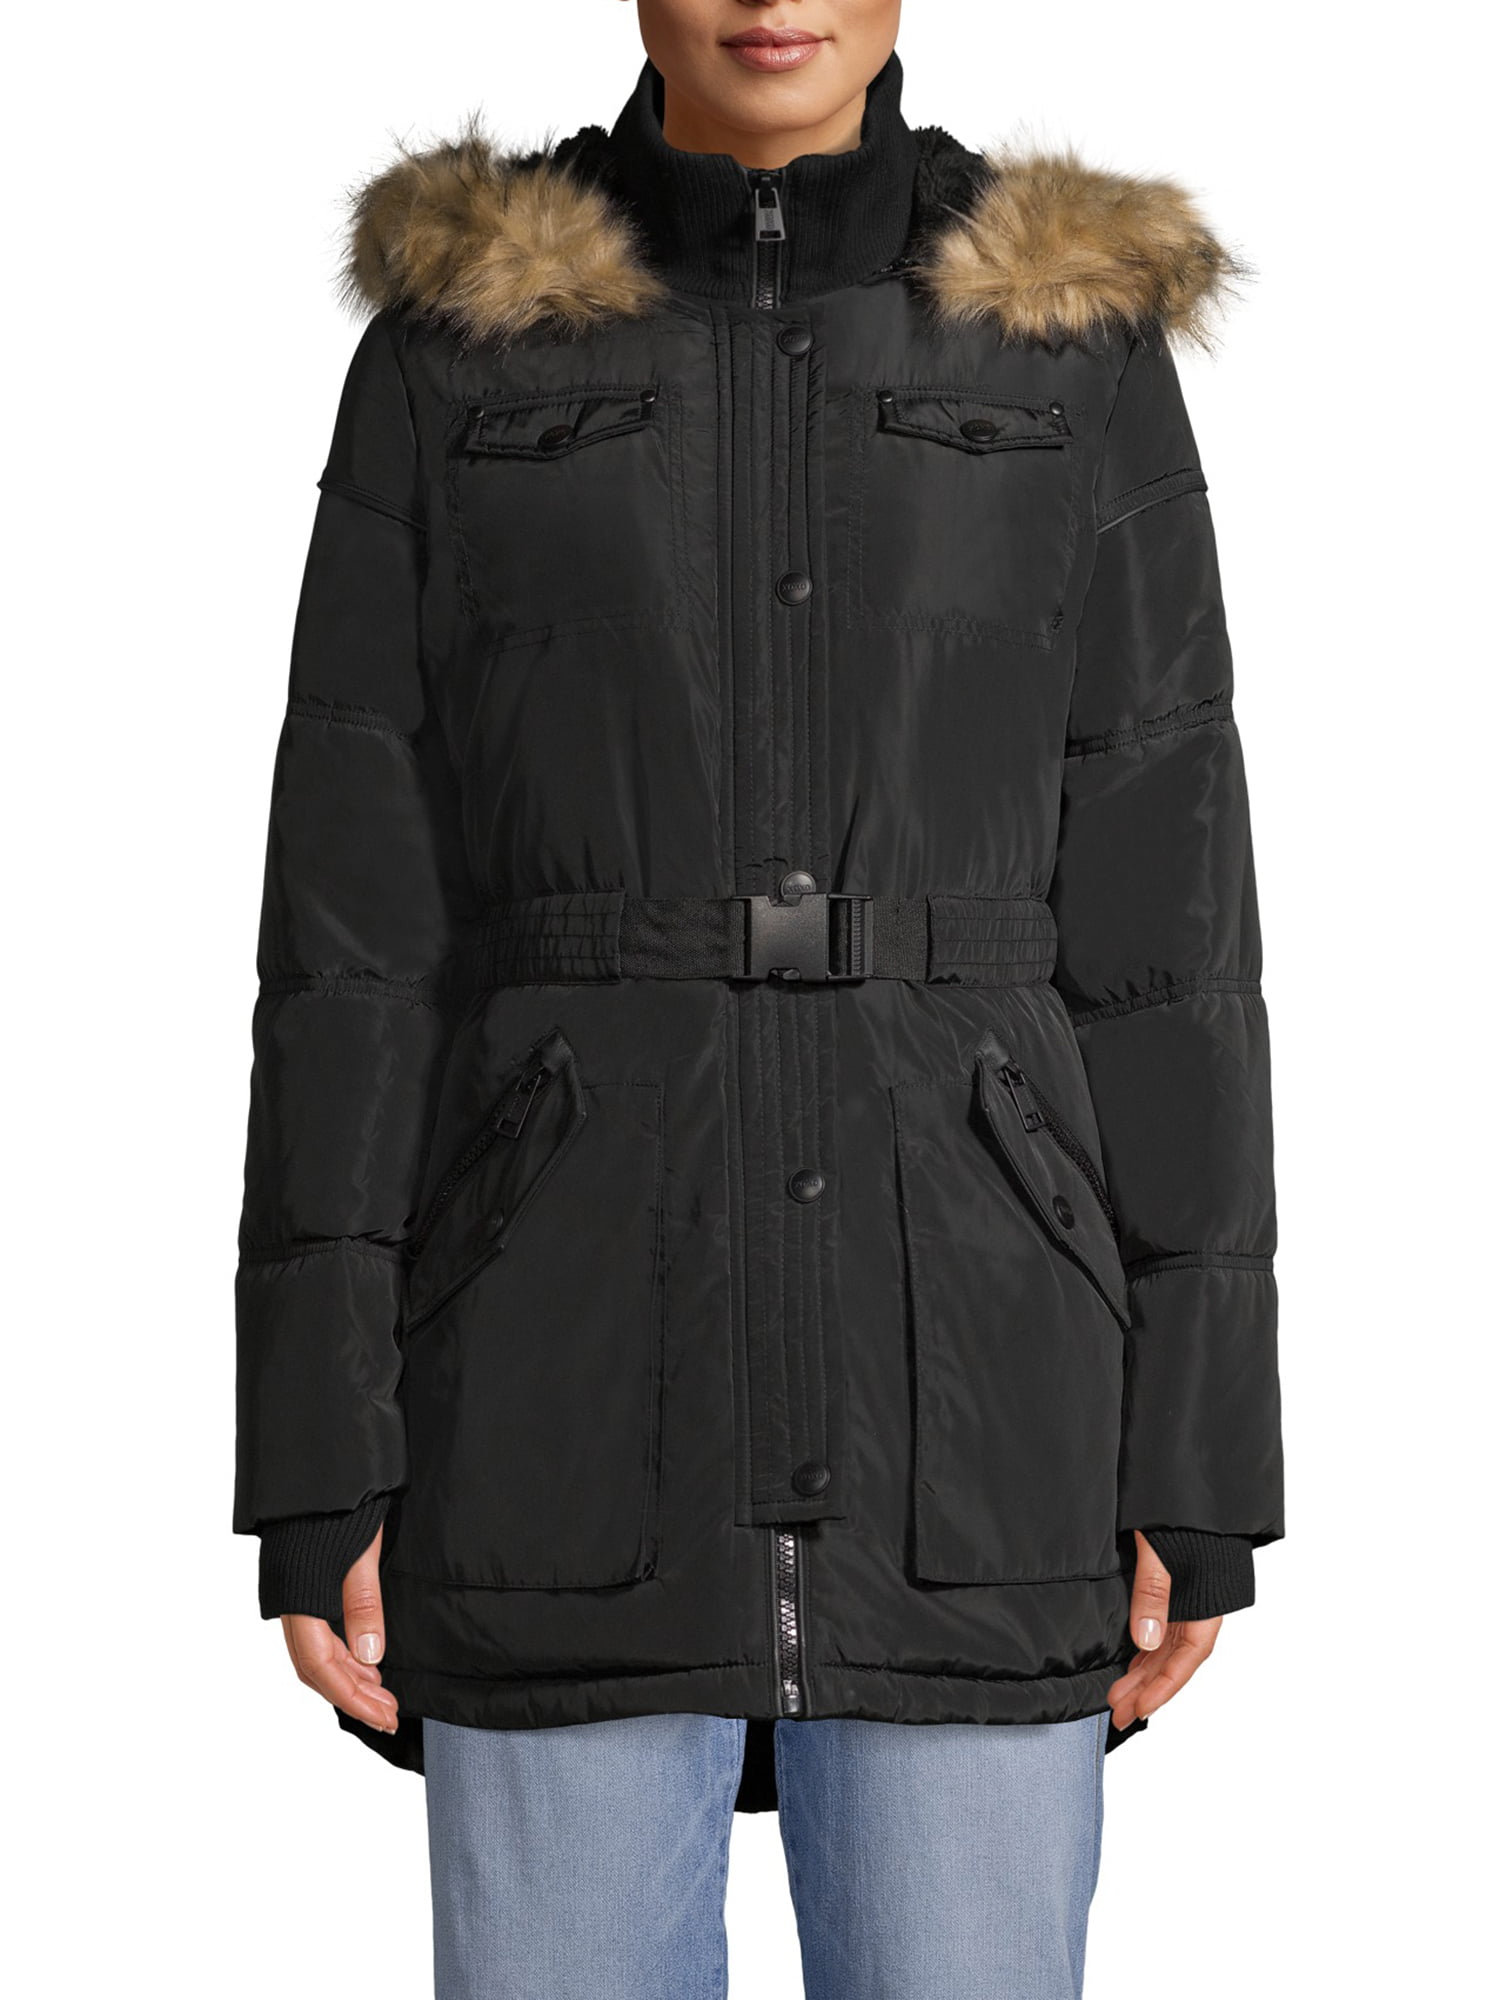 XOXO Juniors' Heavyweight Belted Parka With Faux Fur Hood